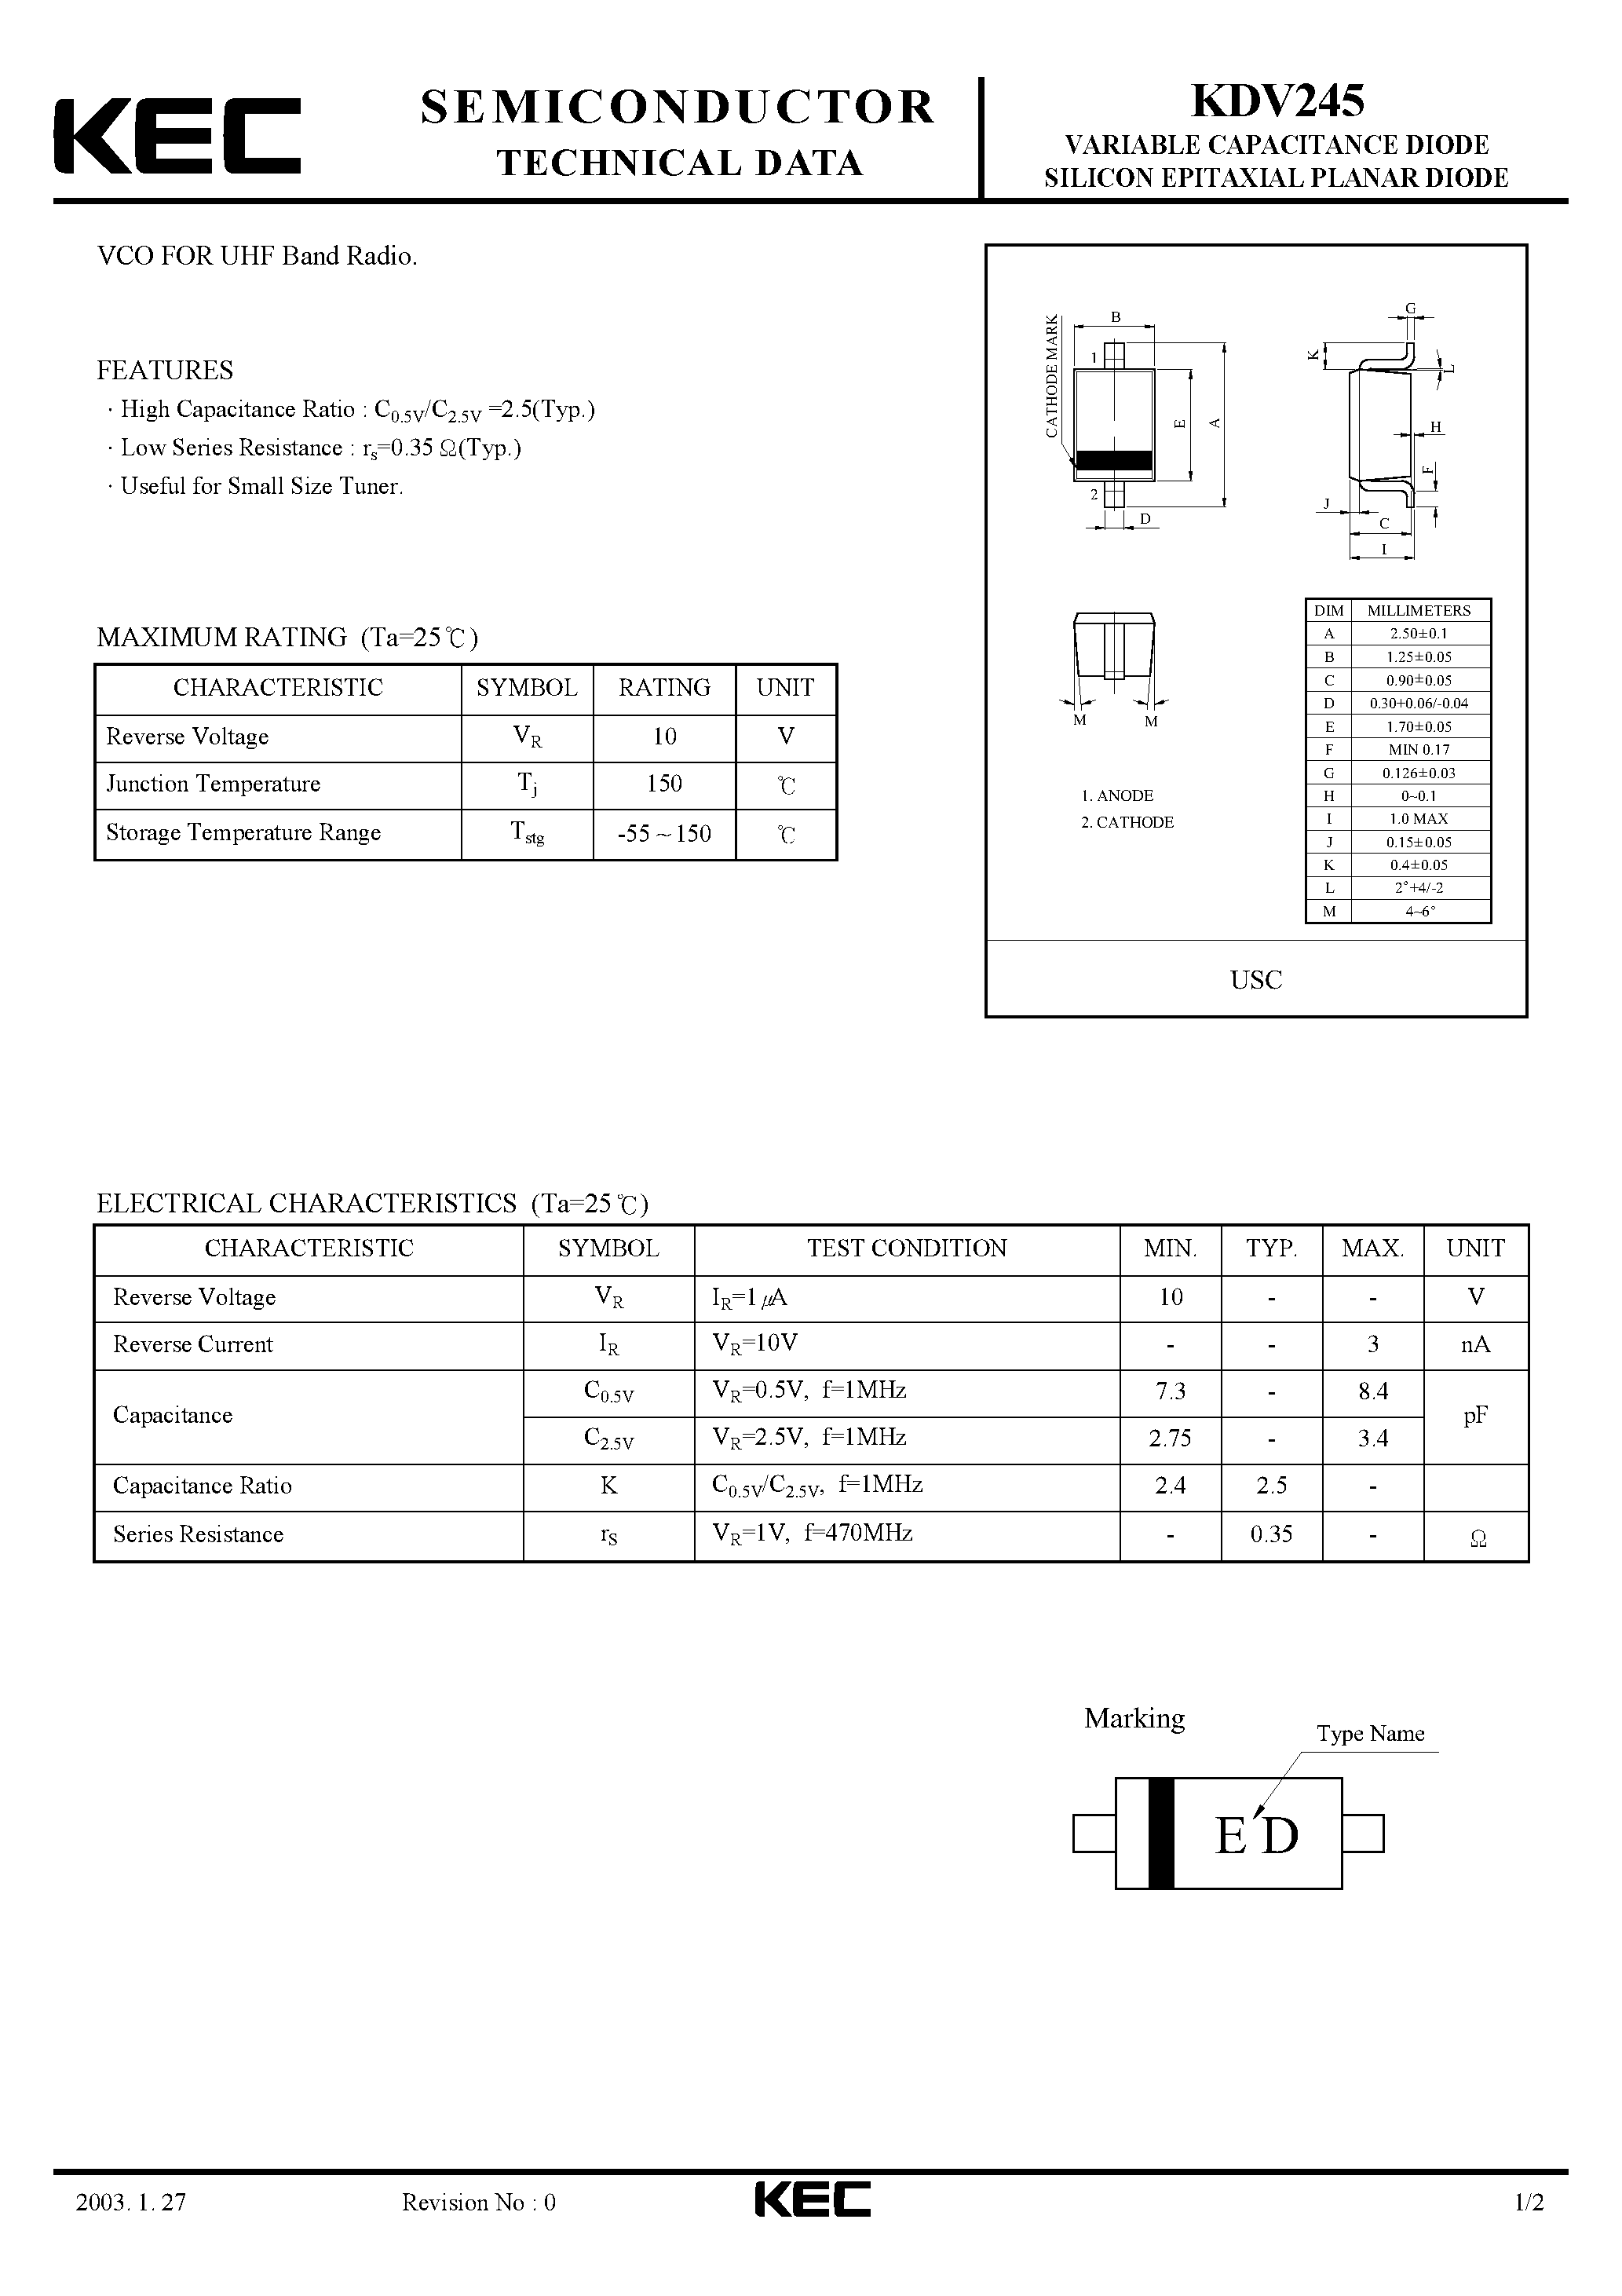 Datasheet KDV245 - VARIABLE CAPACITANCE DIODE SILICON EPITAXIAL PLANAR DIODE(VCO FOR UHF BAND RADIO) page 1